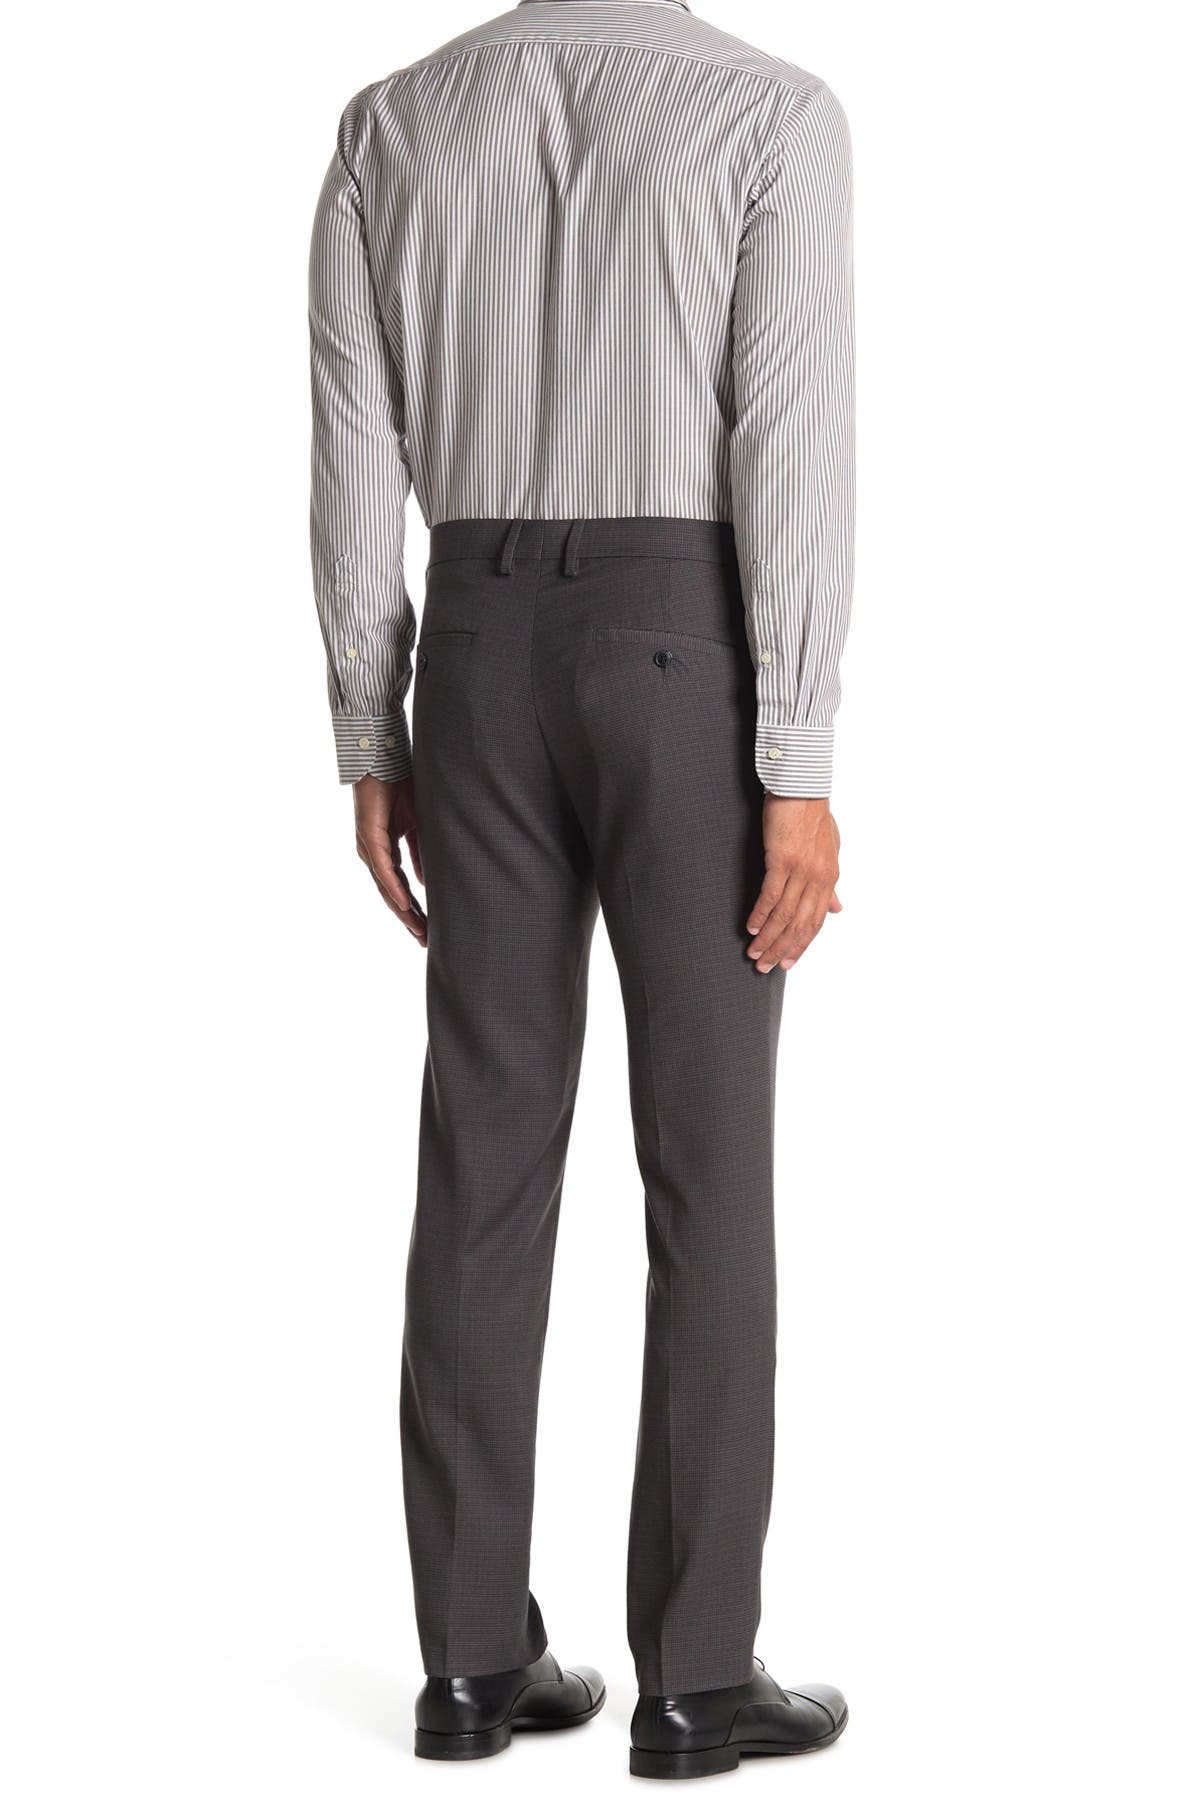 Kenneth Cole Reaction Micro Check Houndstooth Skinny Dress Pant In Dark Grey